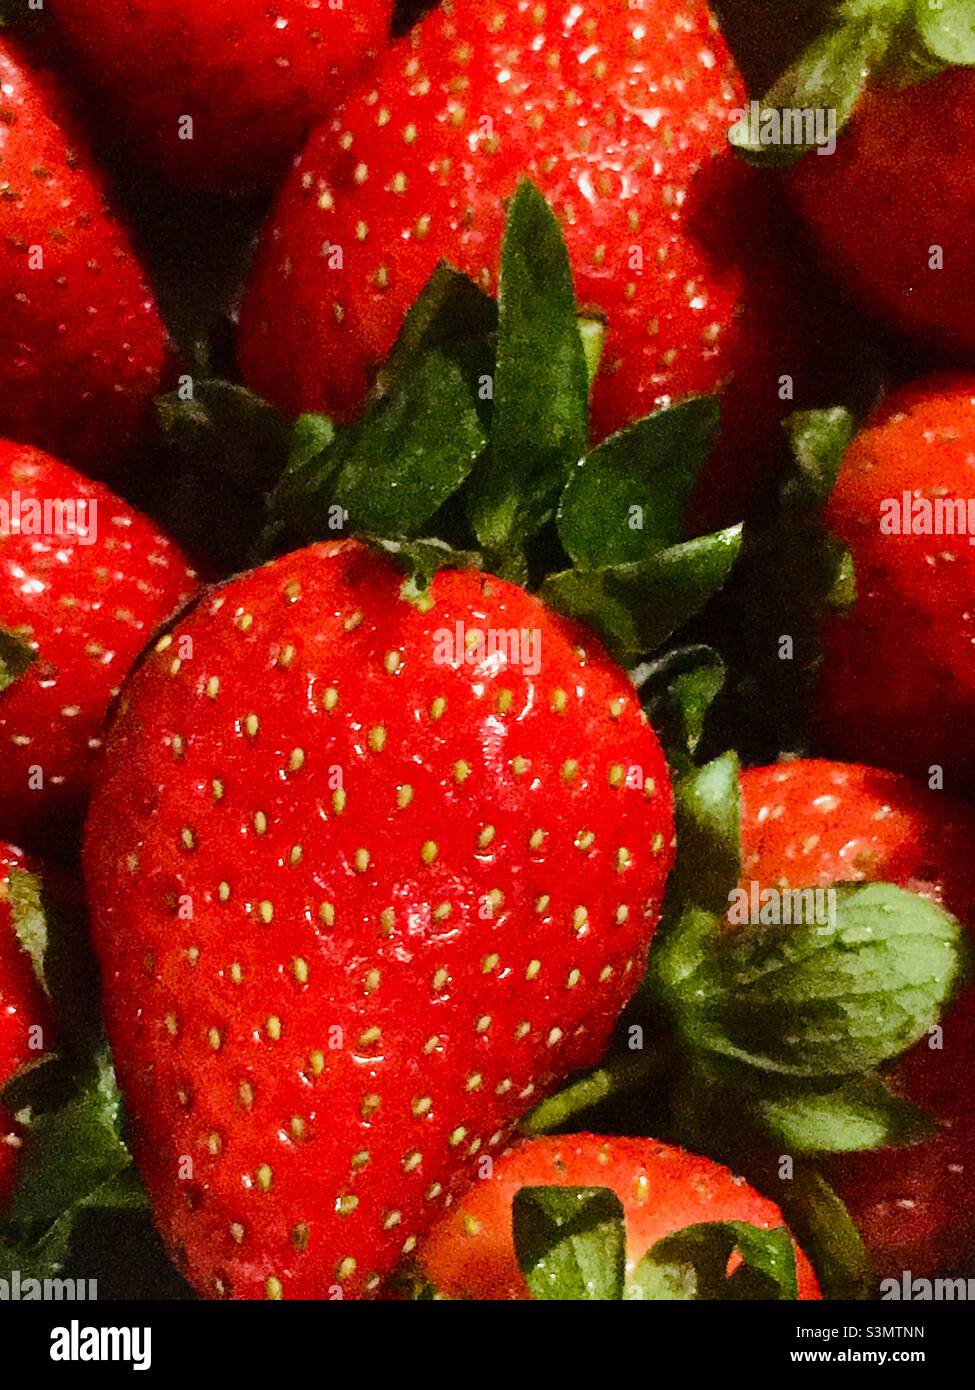 Close up of a bowl of home grown organic strawberries Stock Photo